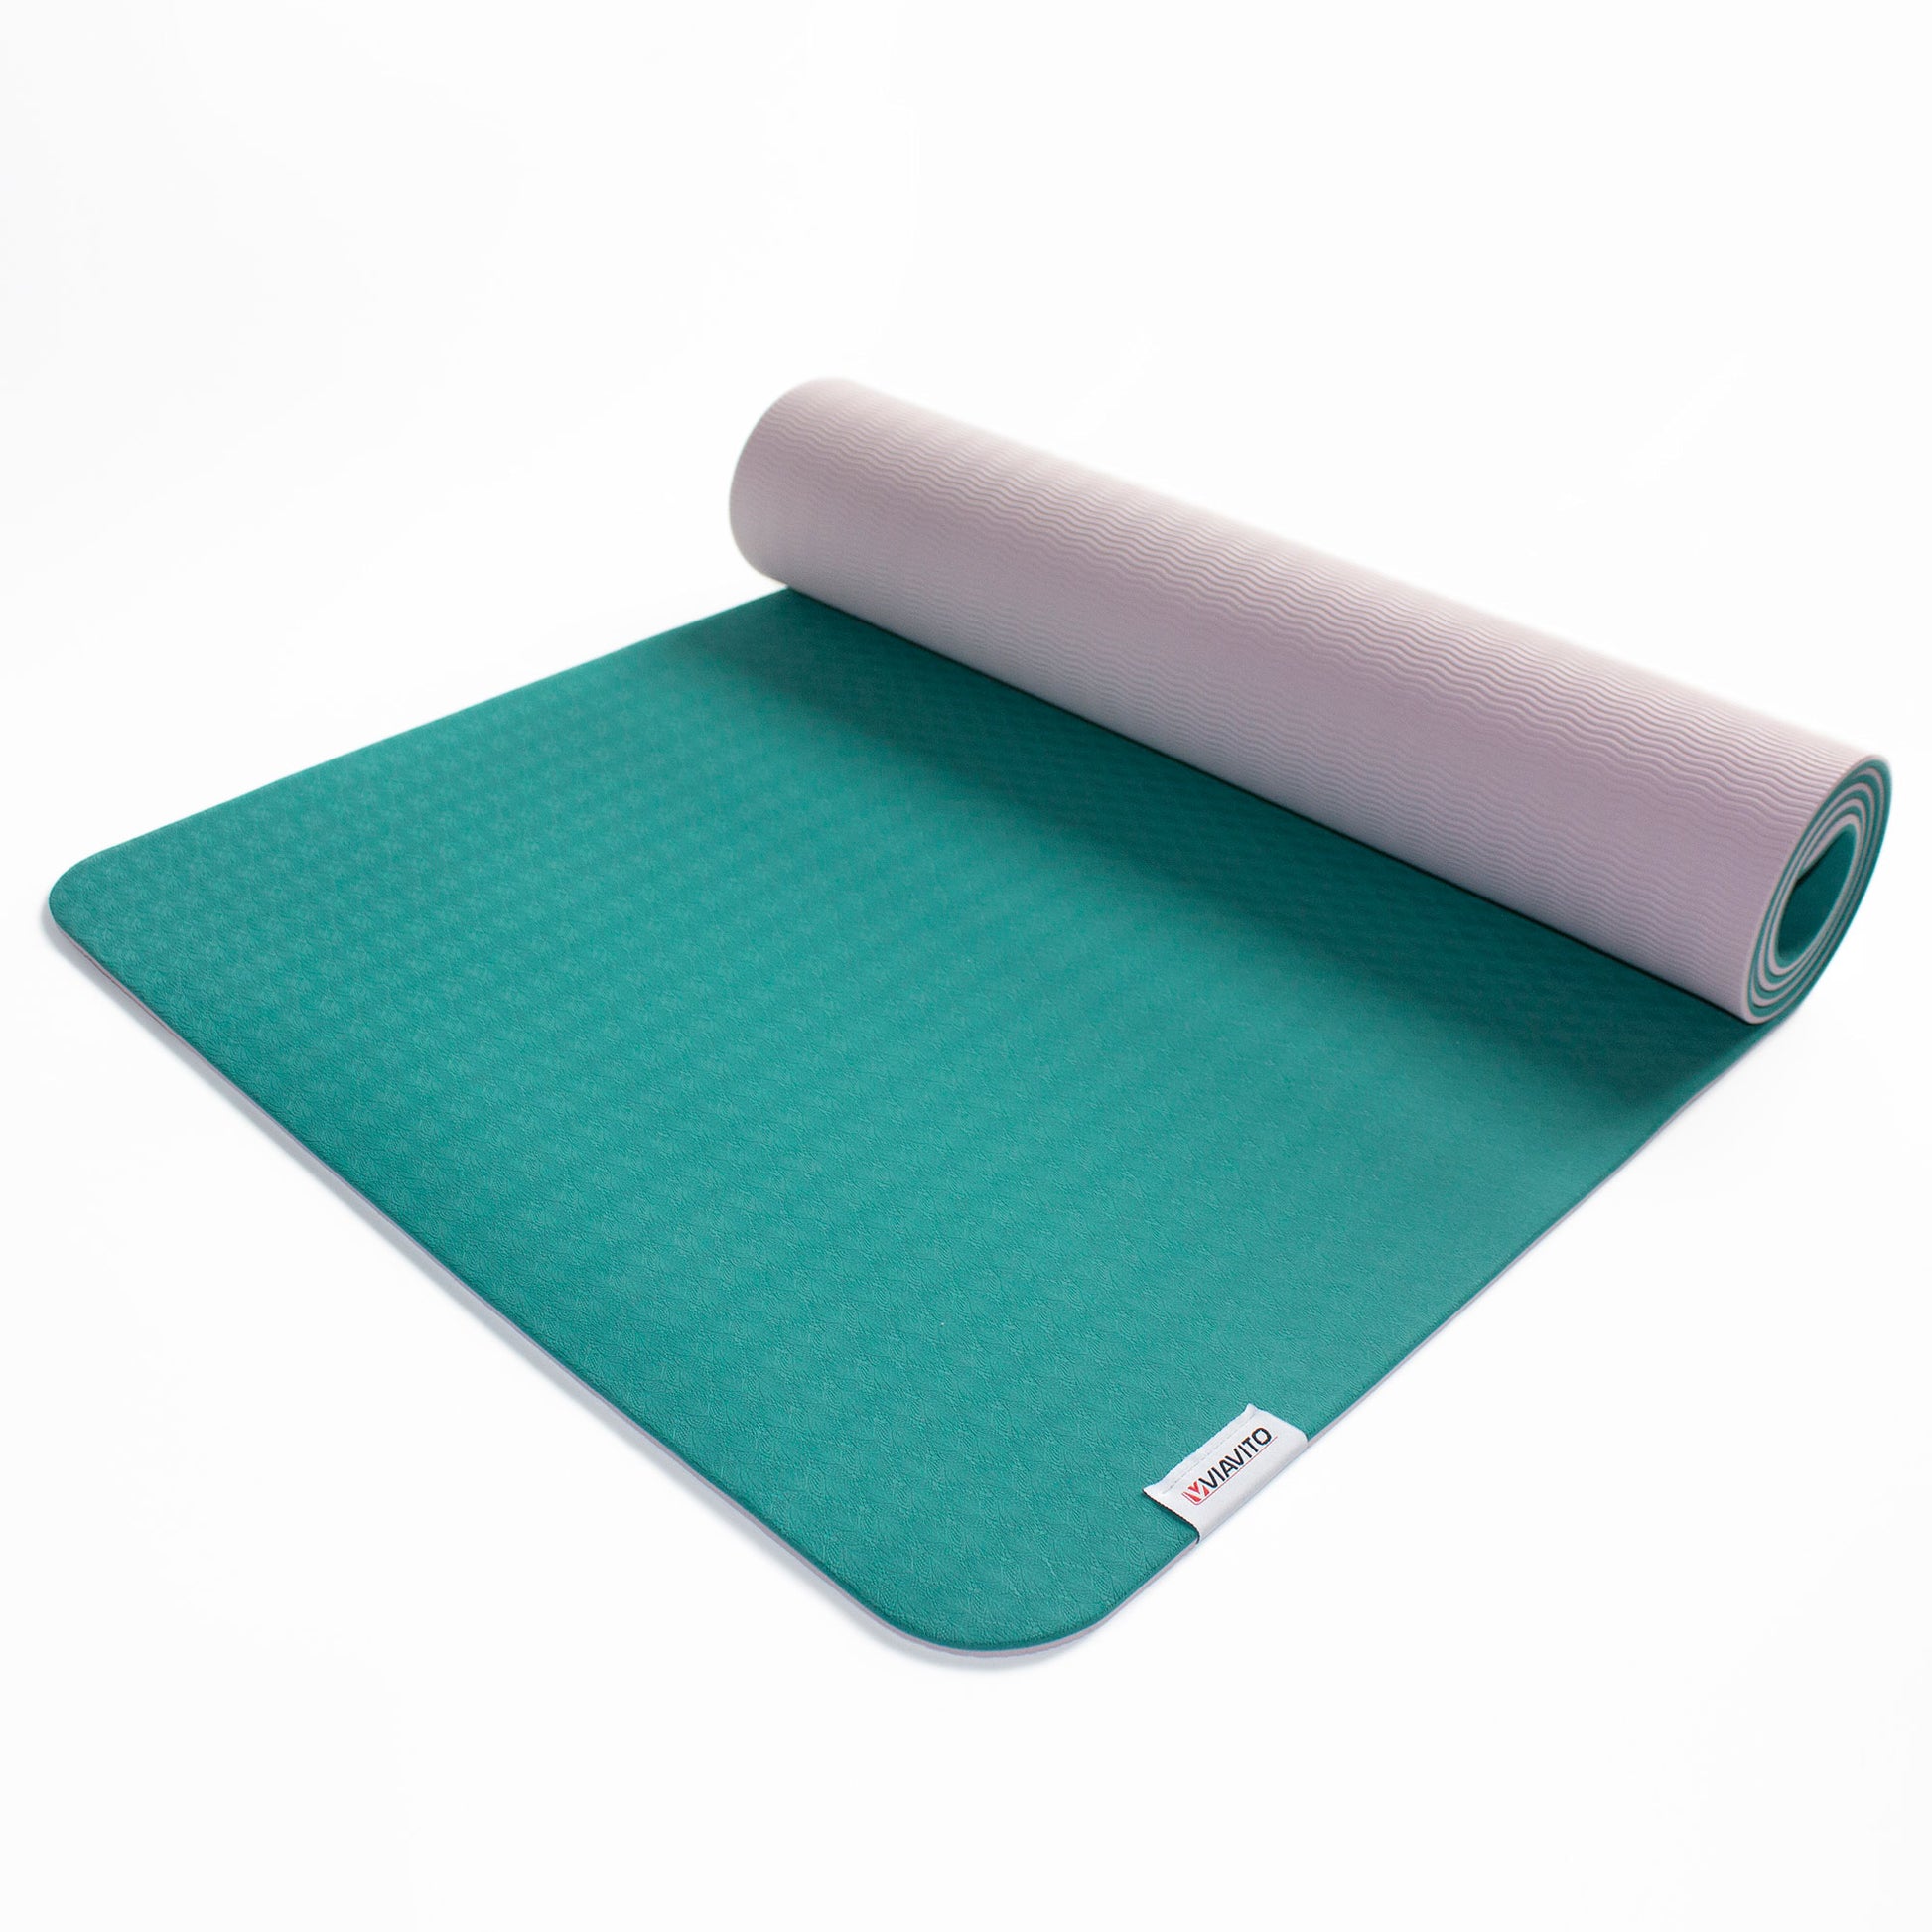 Evolve by Gaiam Fit Yoga Mat, 6mm